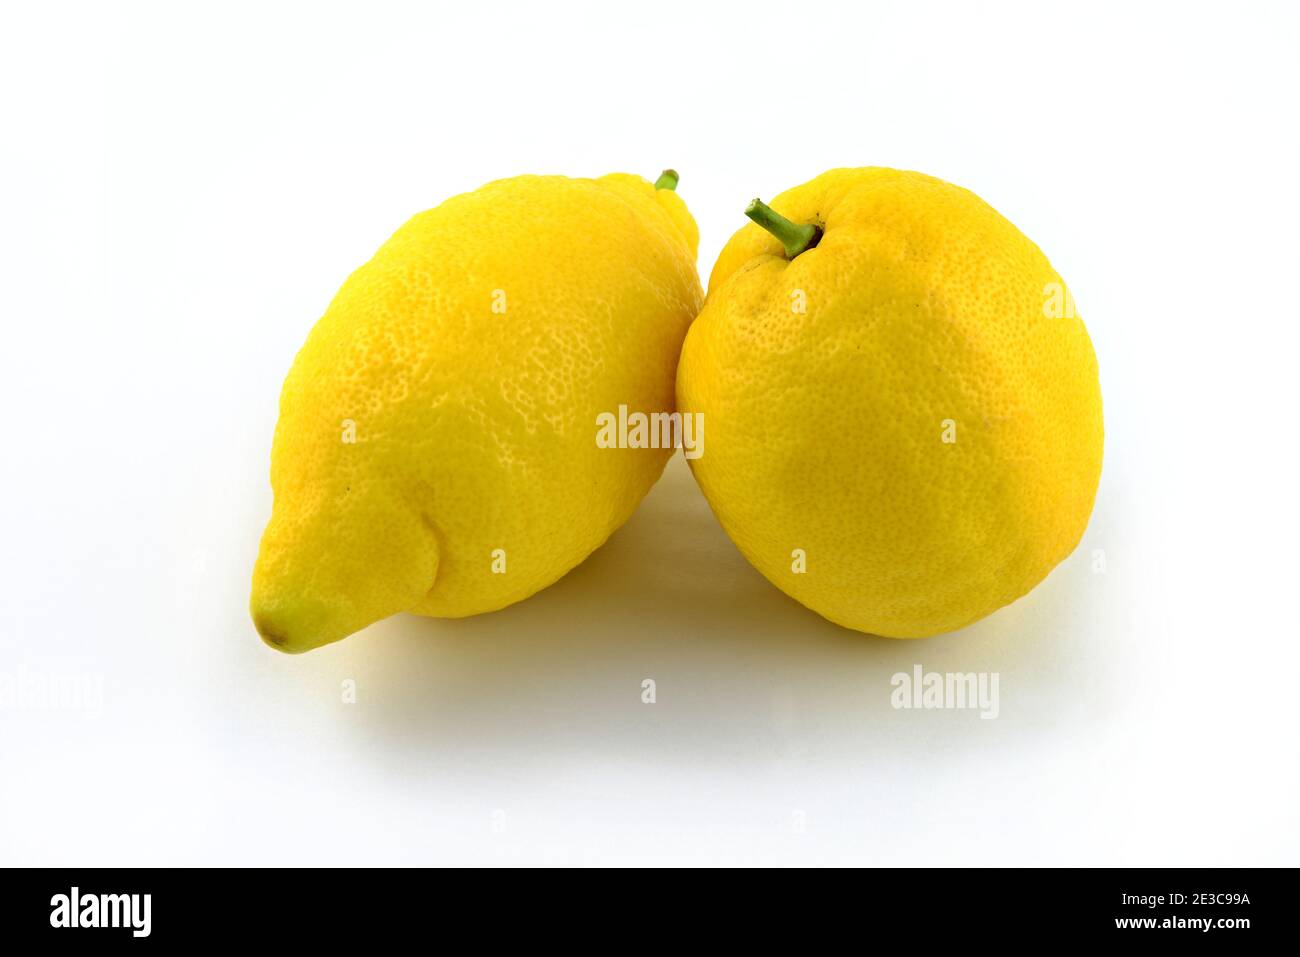 Two yellow lemons with green leaves on white background. Fresh citrus. Stock Photo